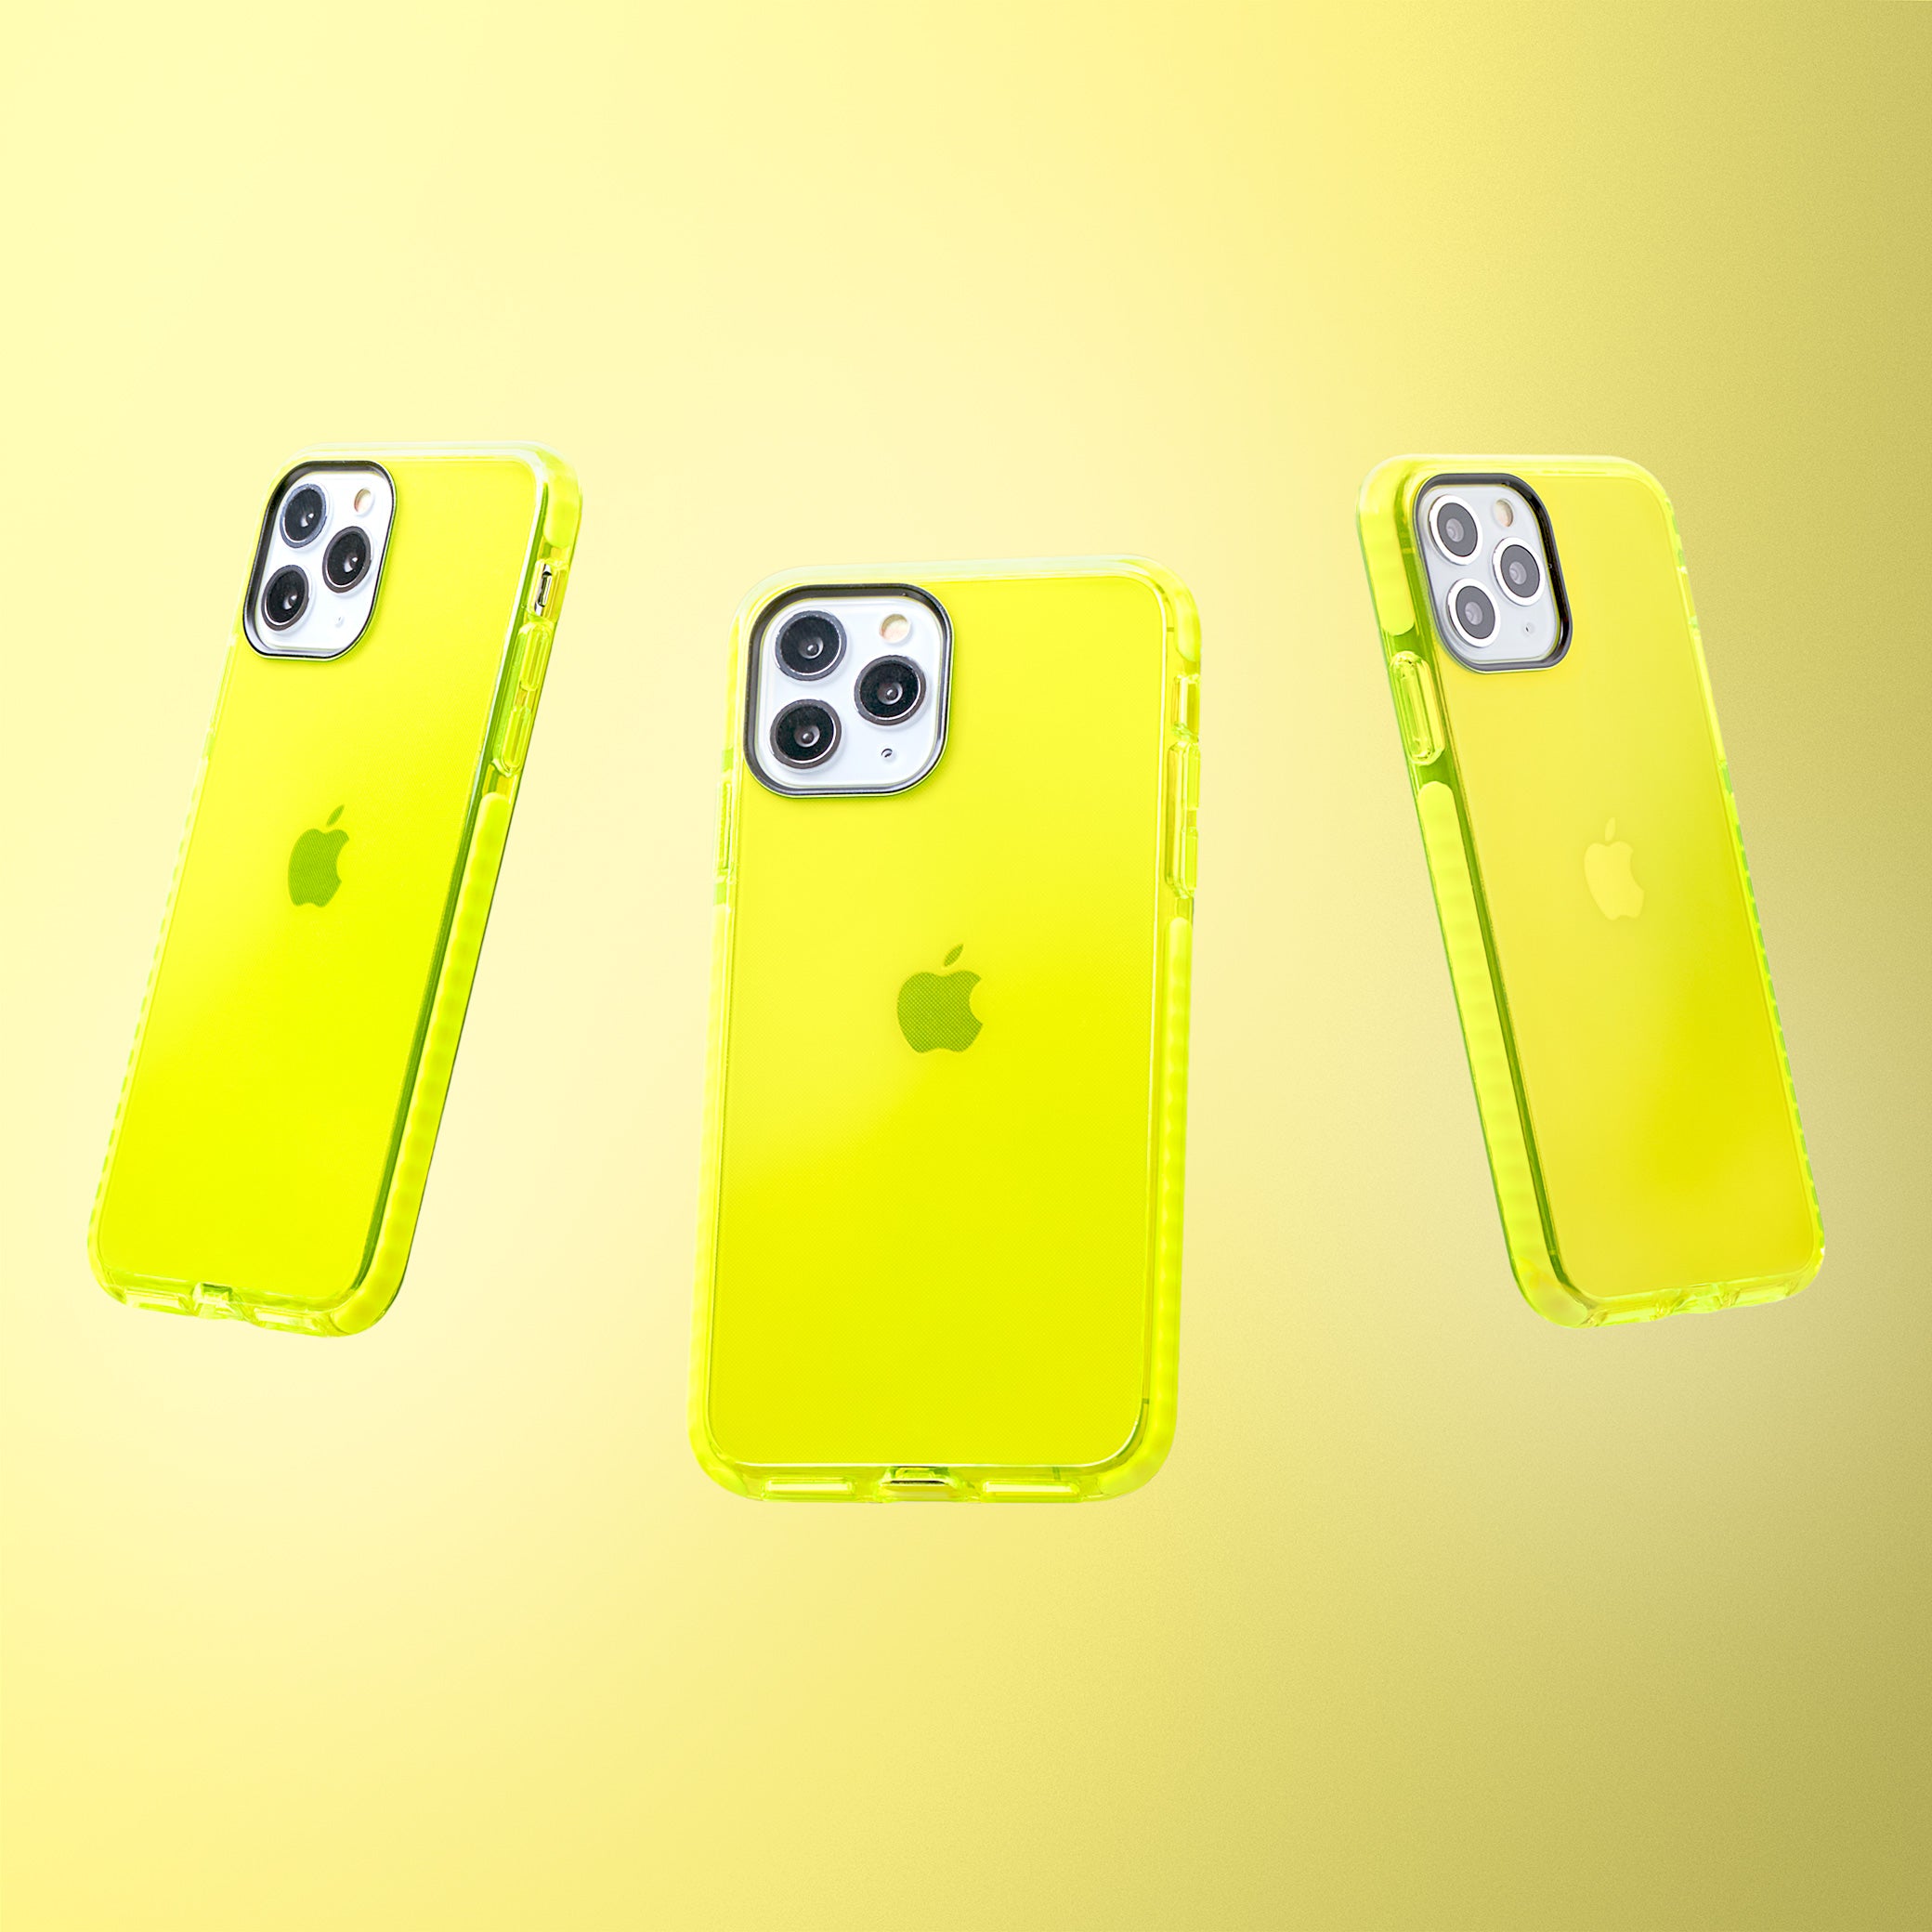 Barrier Case for iPhone 11 Pro - Hi-Energy Neon Yellow